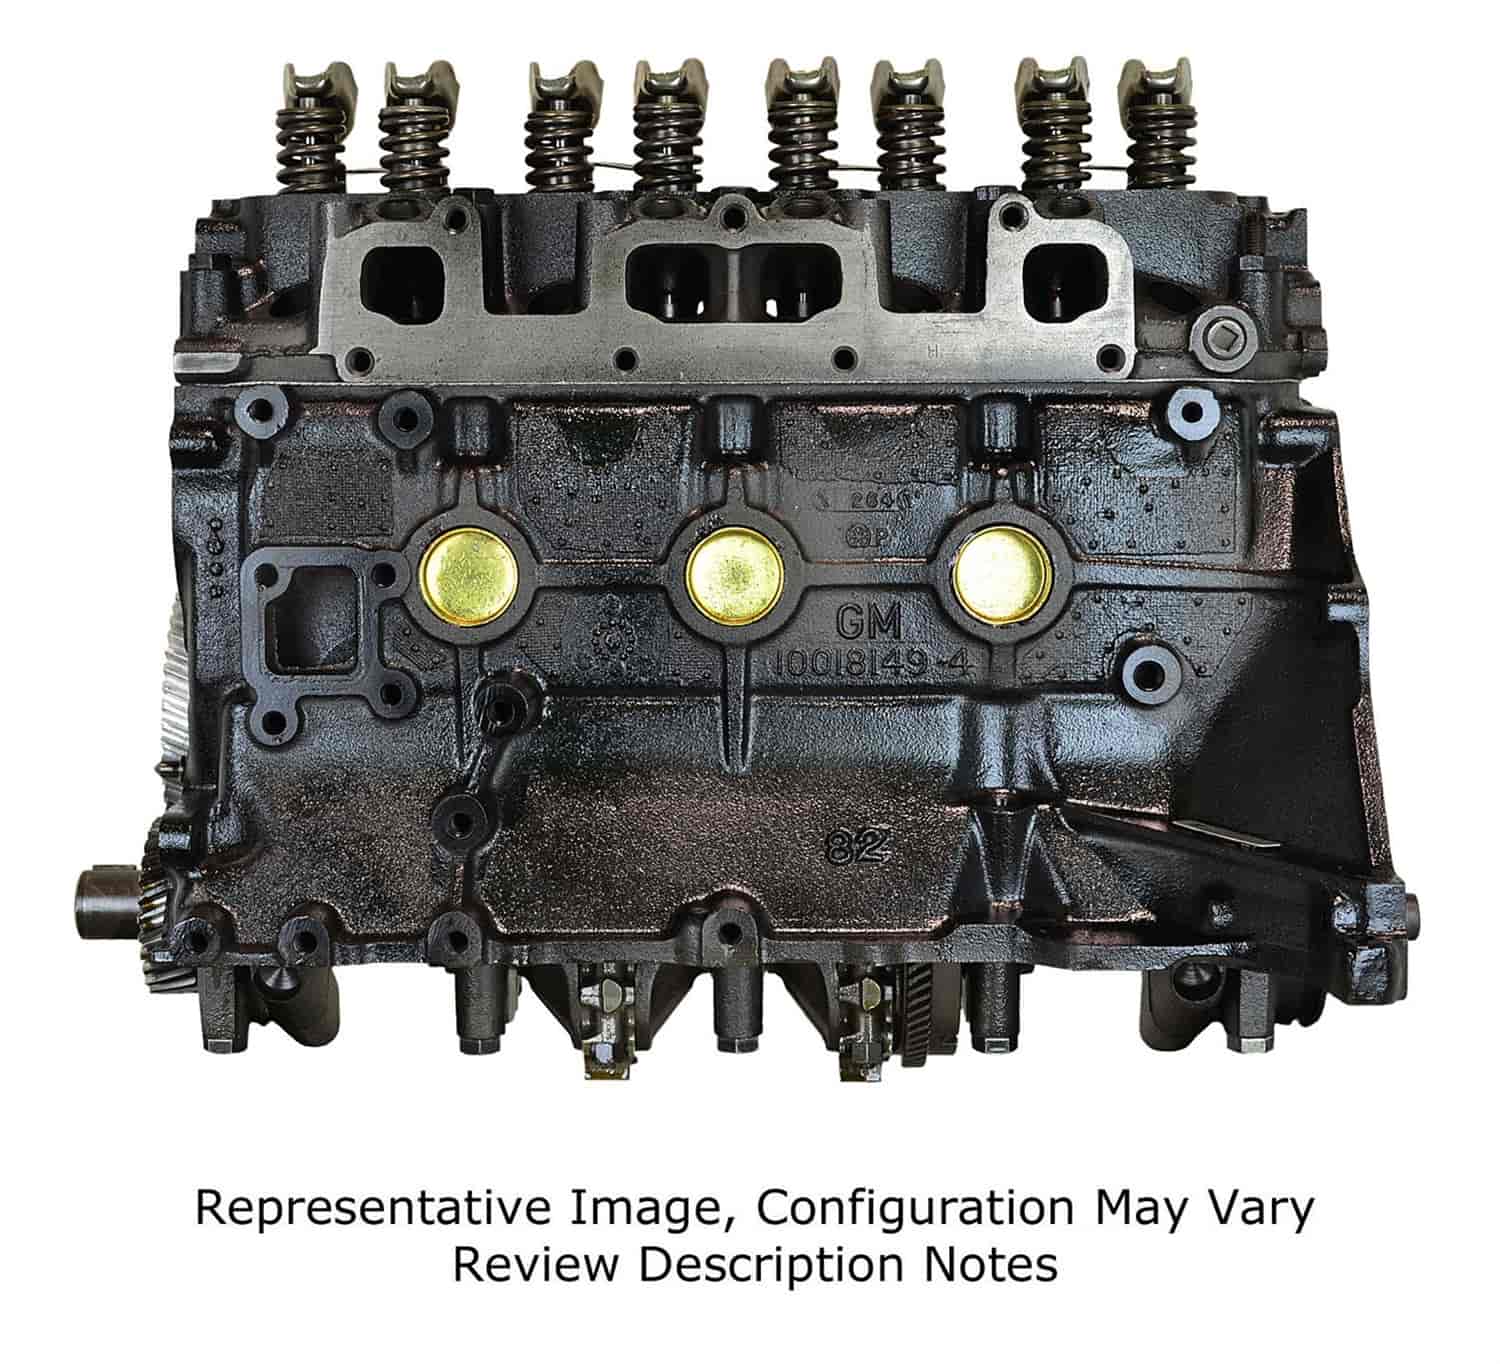 Remanufactured Crate Engine for 1982-1983 Chevy/Buick/Olds/Pontiac with 151ci/2.5L L4